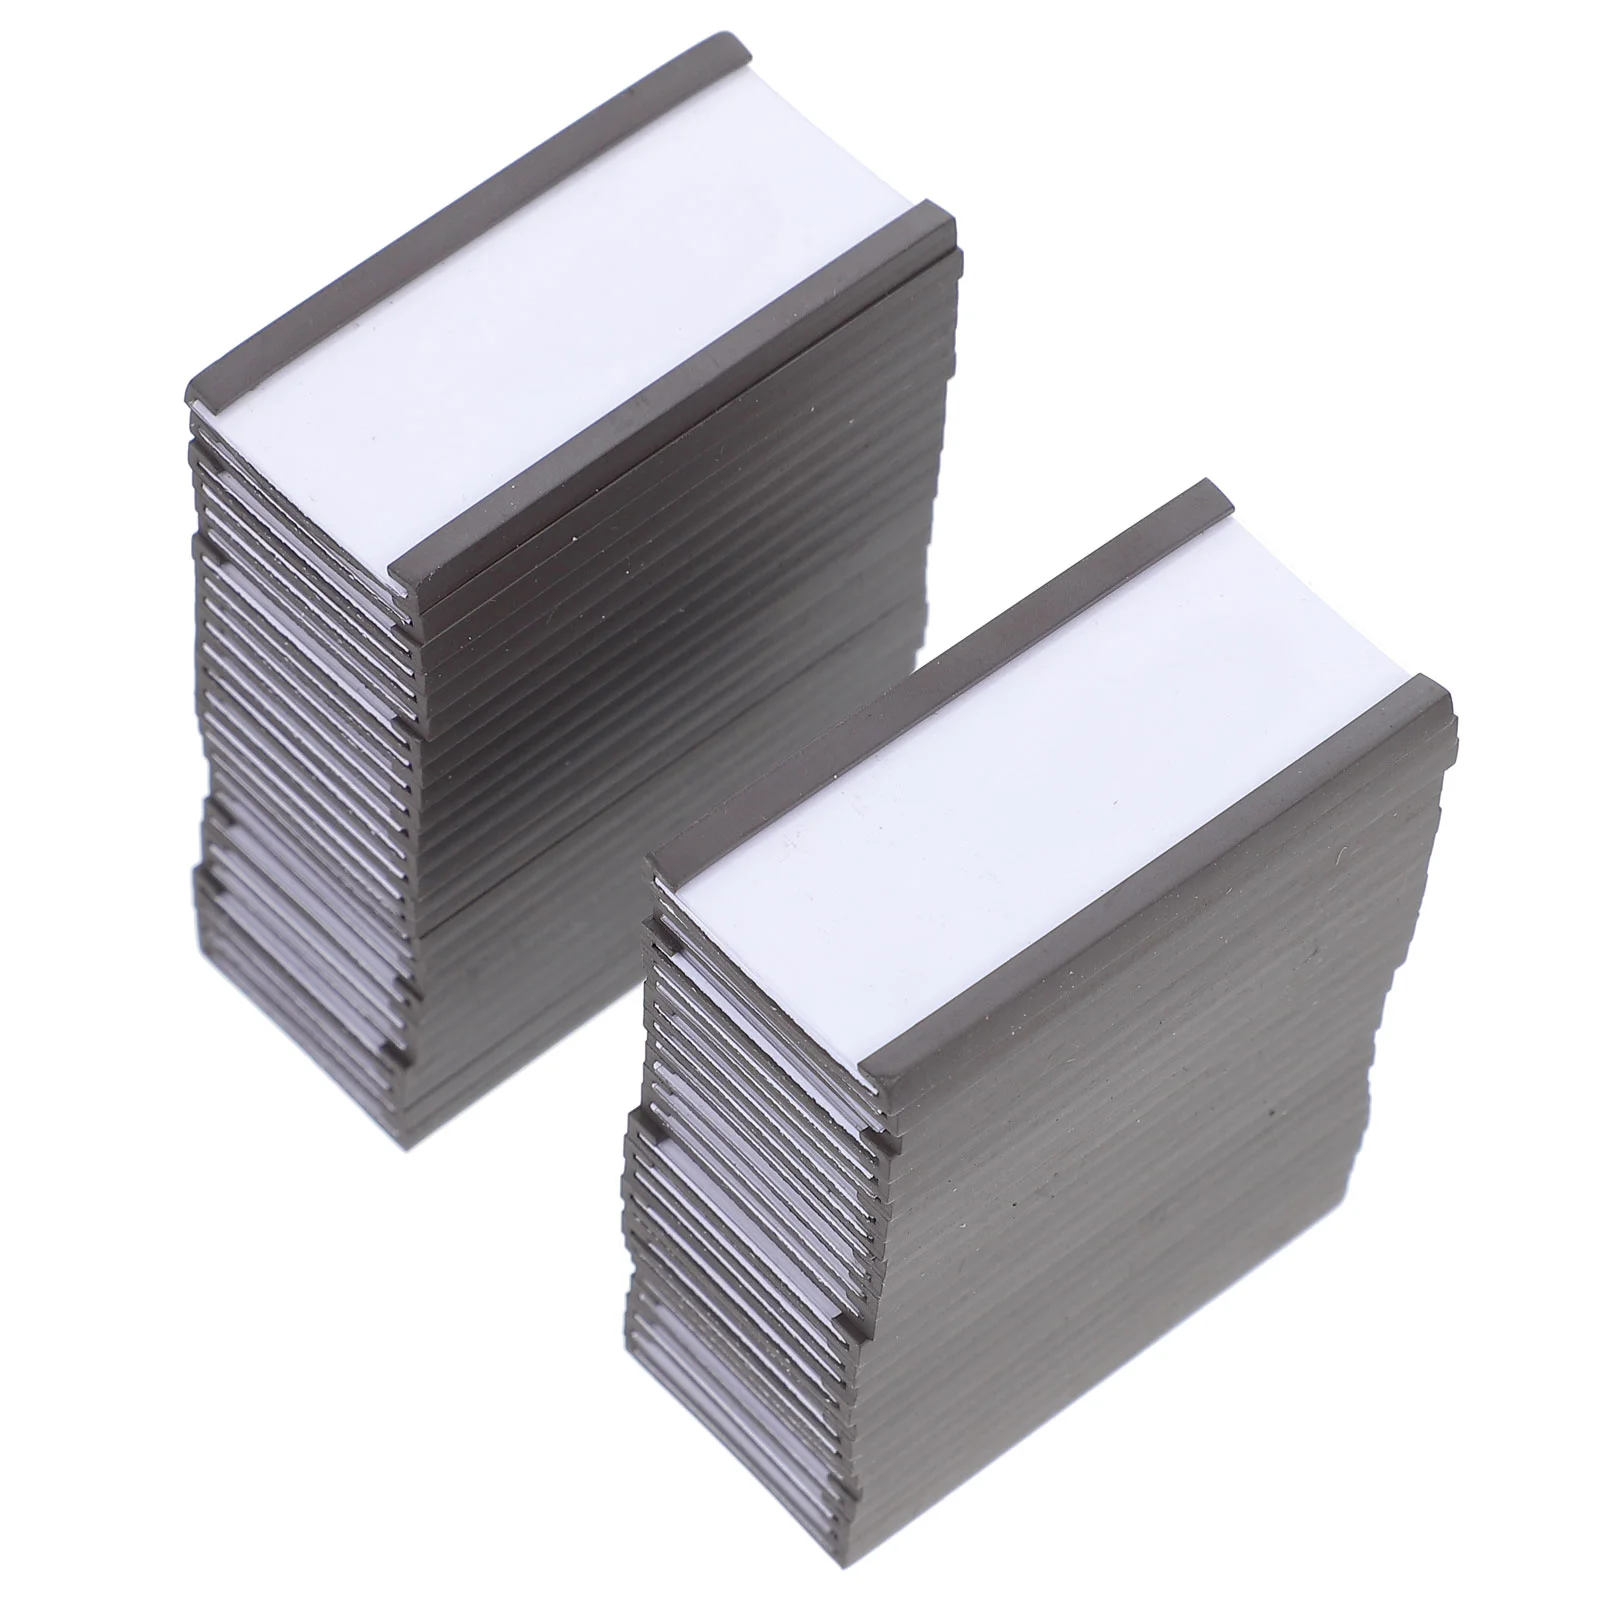 50pcs Magnetic Label Holders Price Label Paper Inserts Magnetic Data Holders Price Sign Holders Card protectors magnetic name tags holder channel label clamp labels clip display holders paper warehouse sign